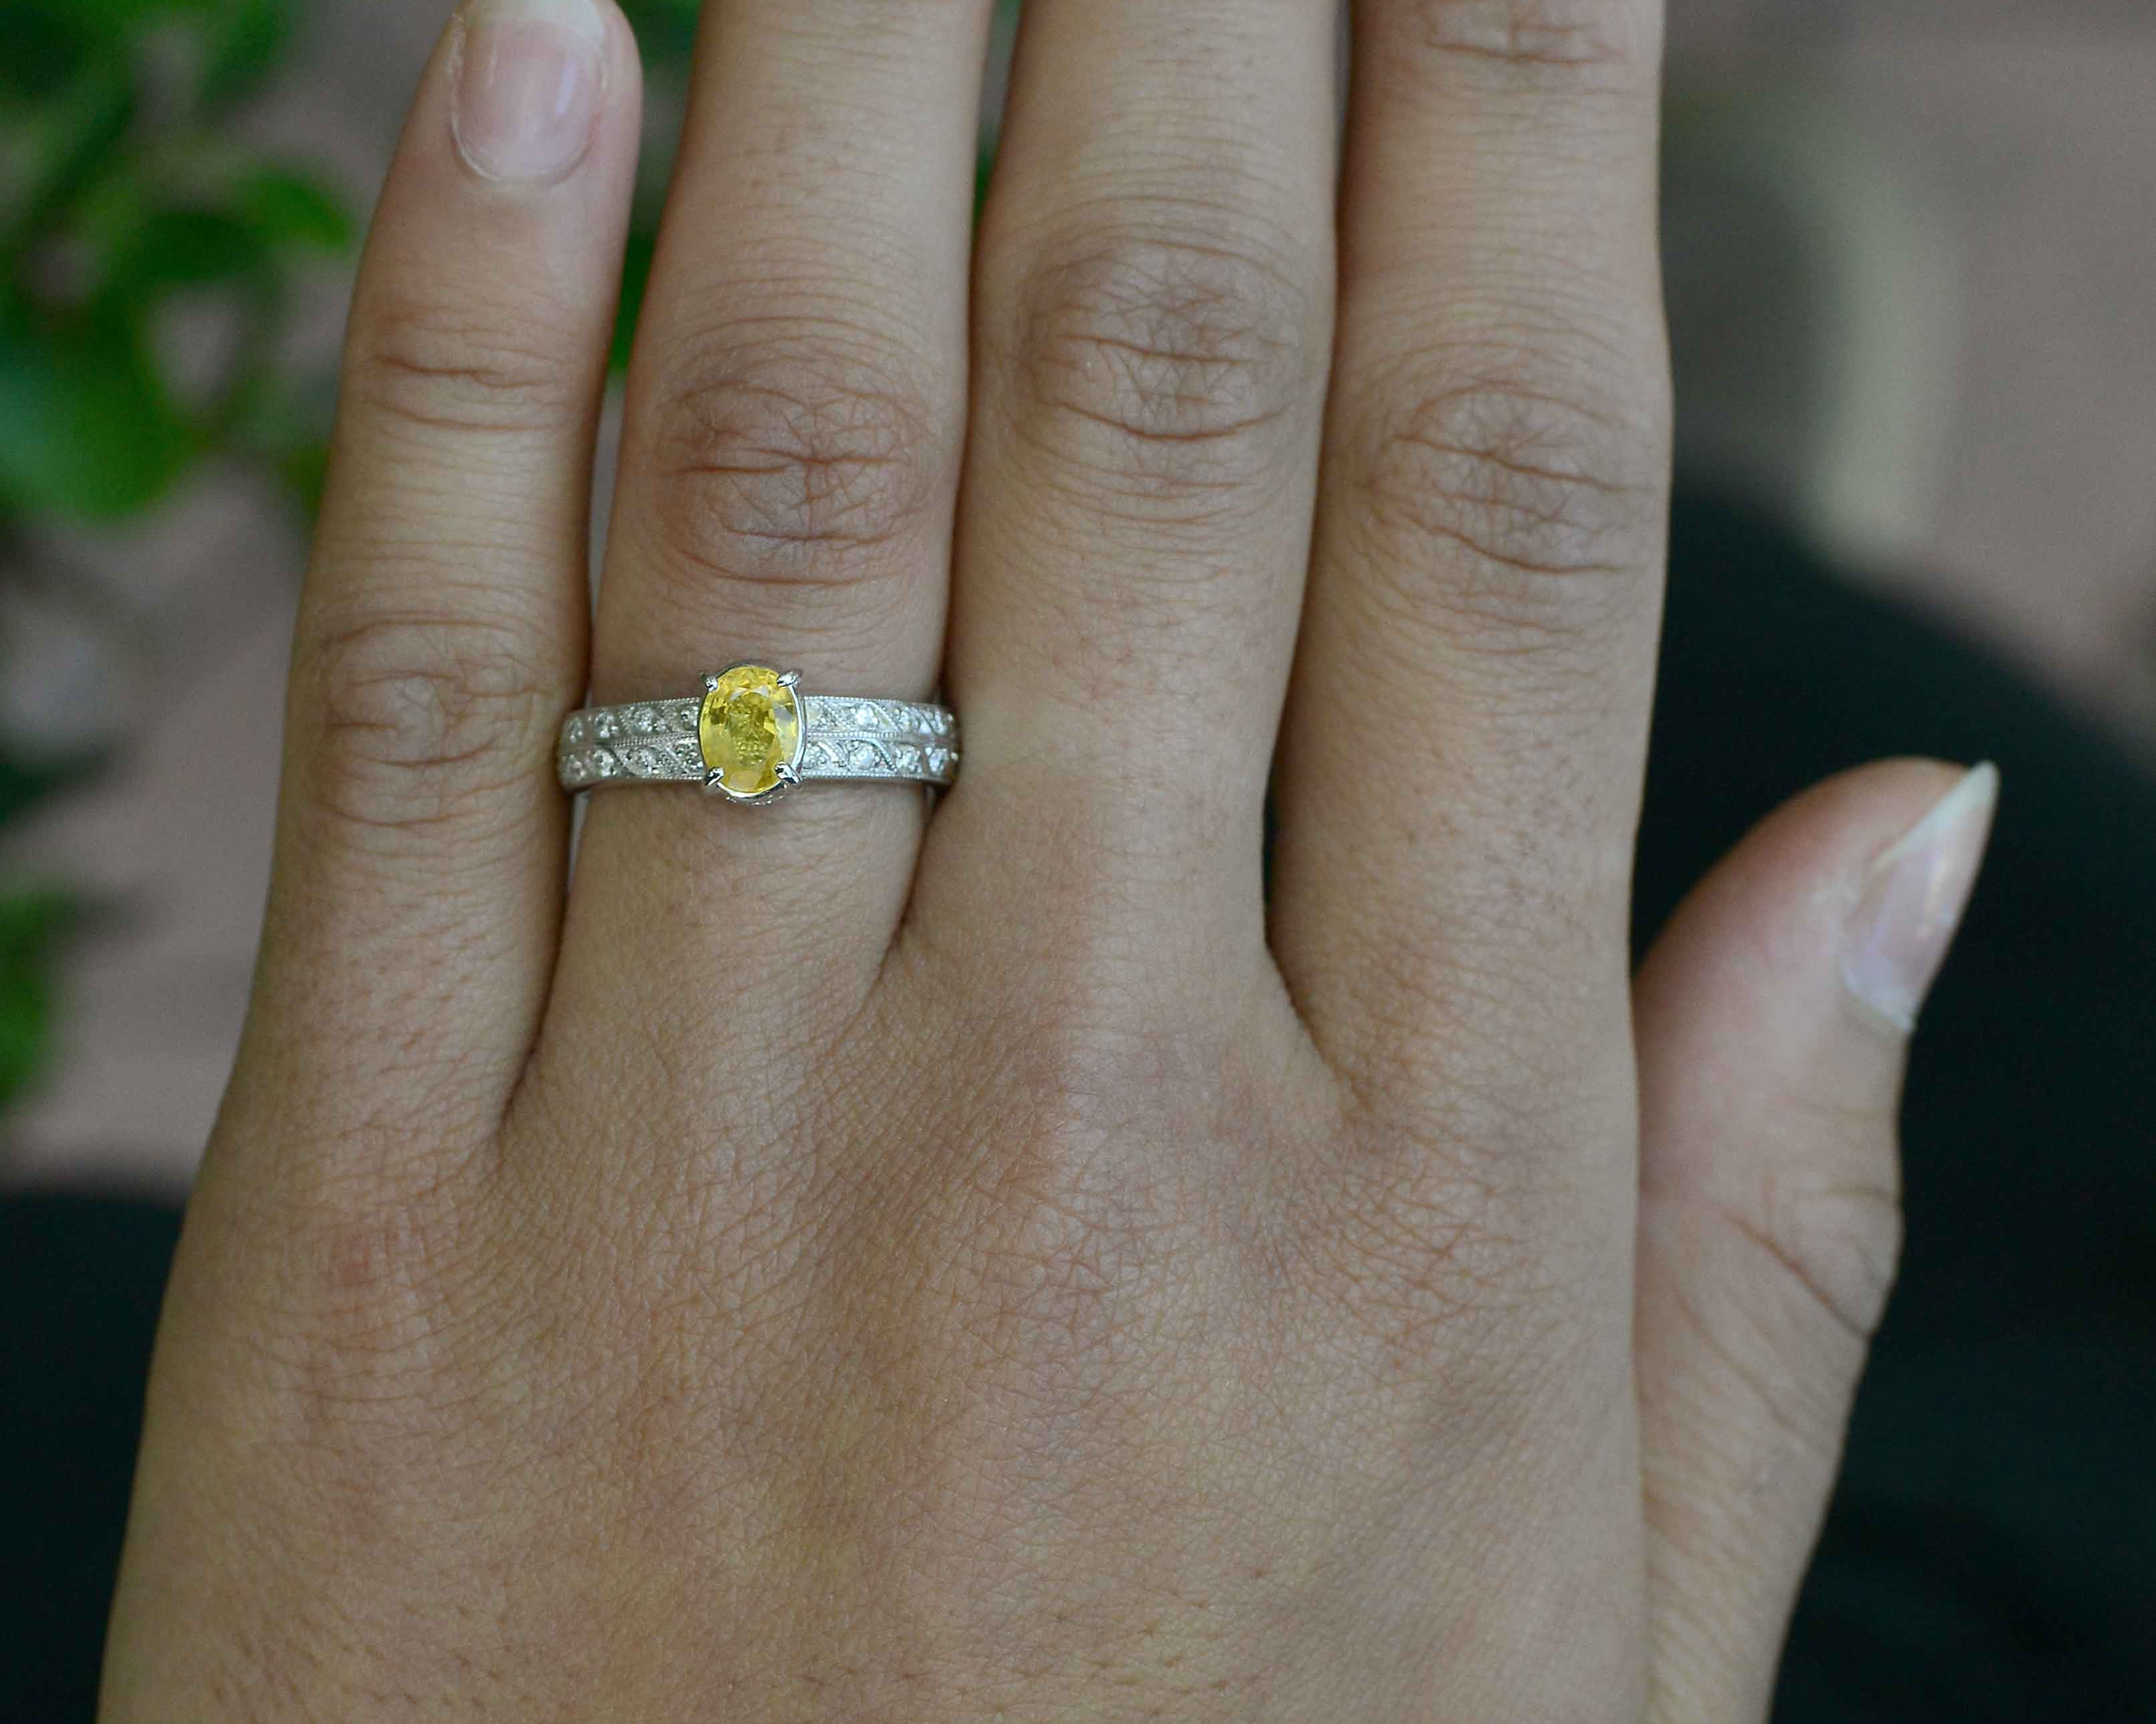 This diamonds band with a yellow sapphire could also be a stacking ring.